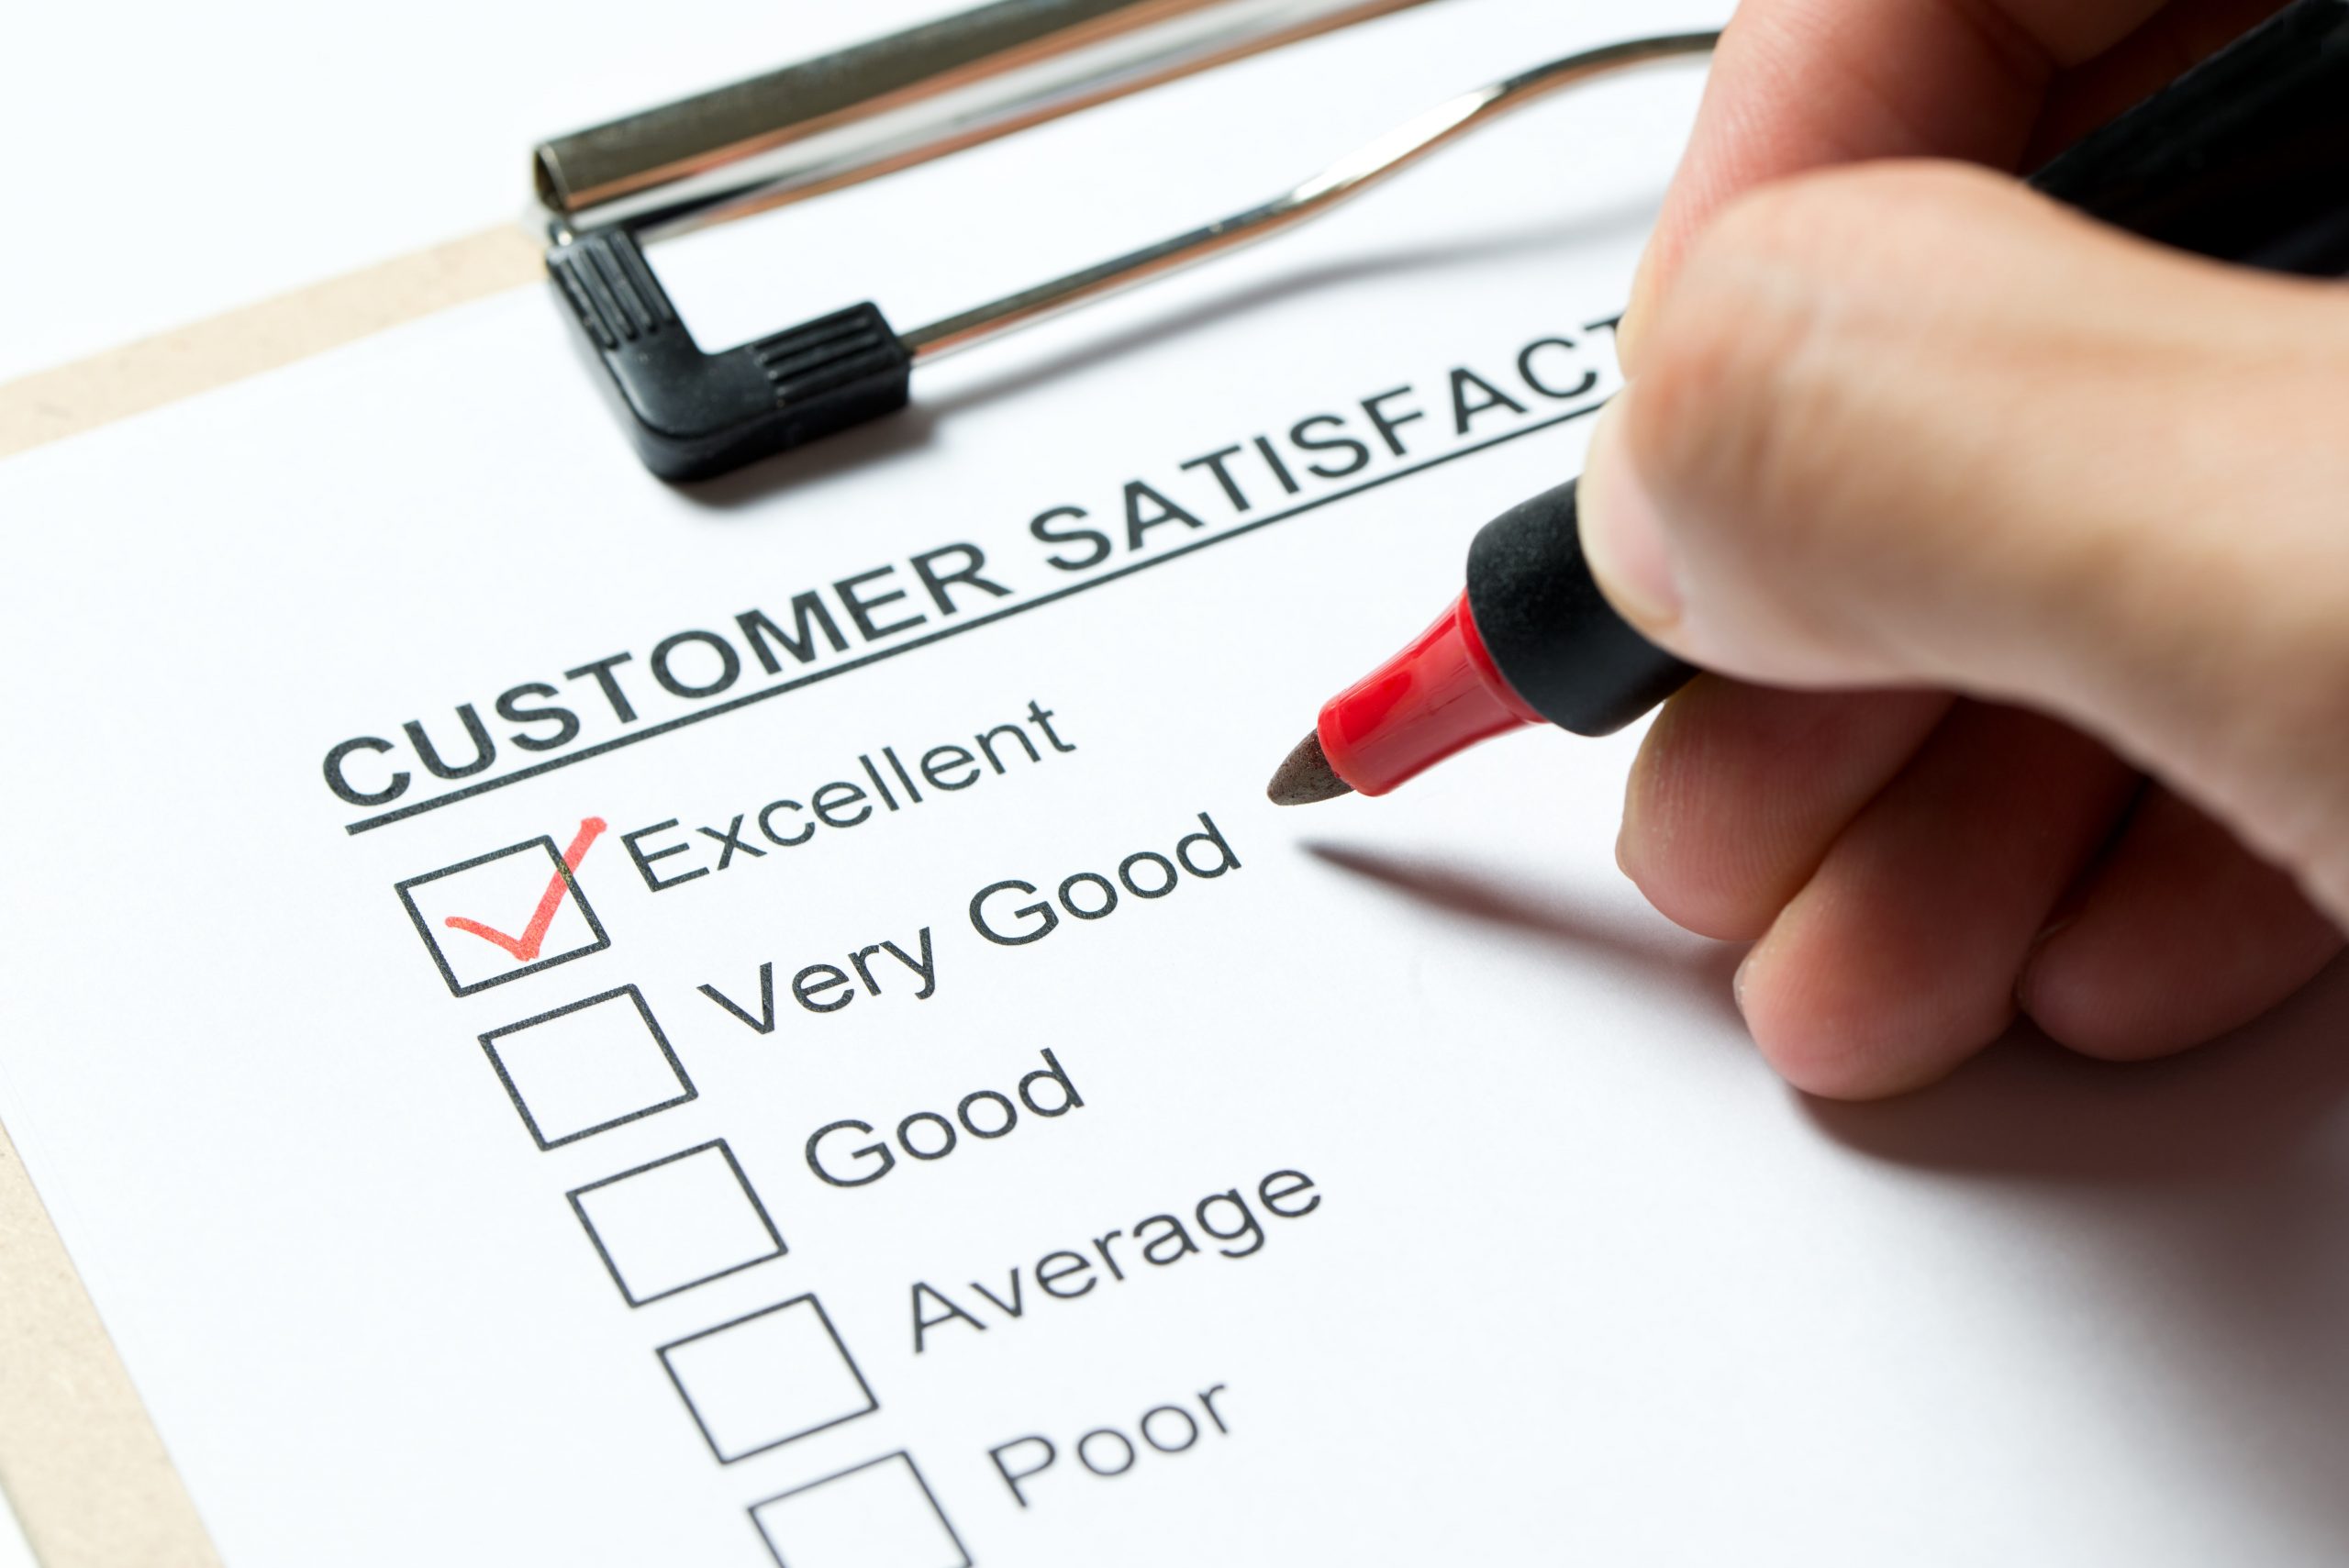 7 Smart Ways to Collect Customer Feedback Online